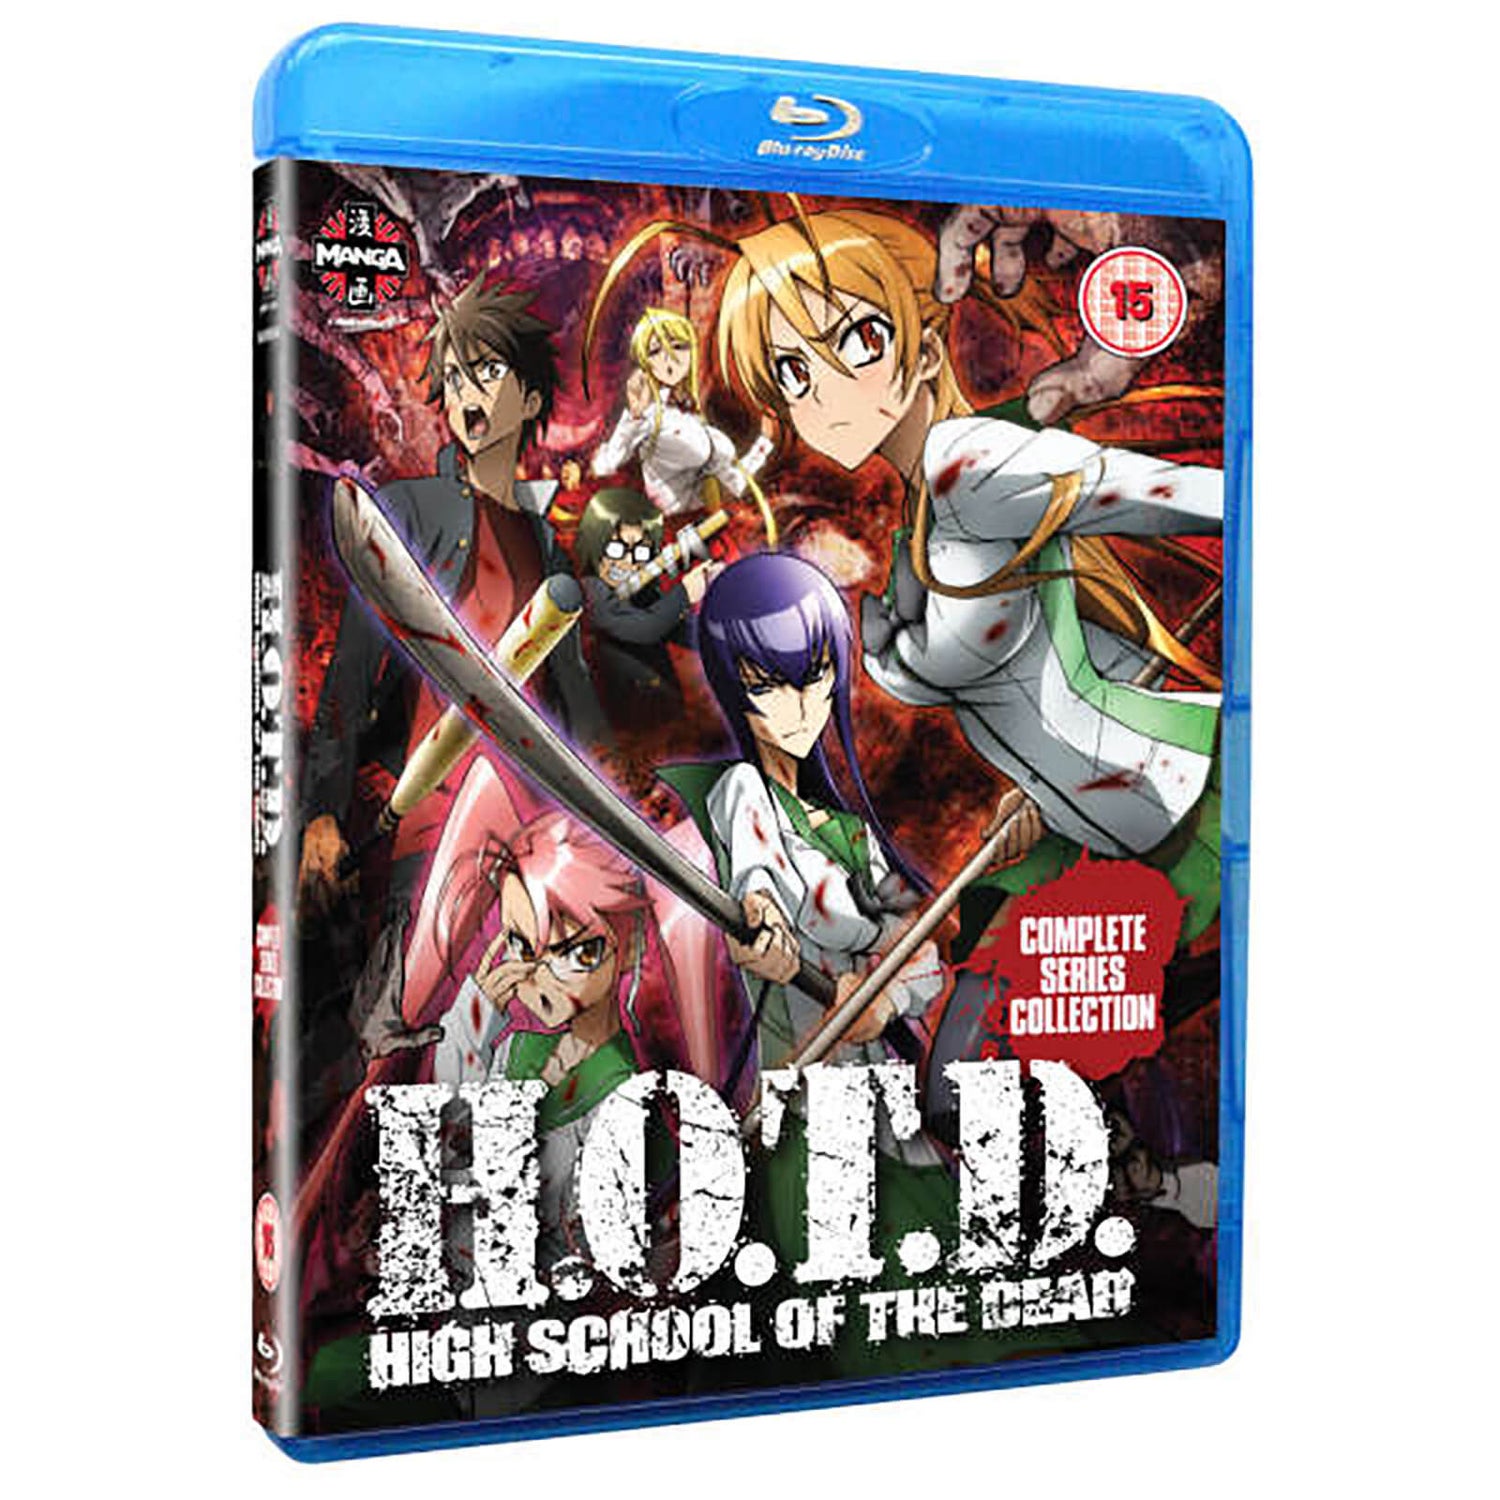 High School of the Dead 